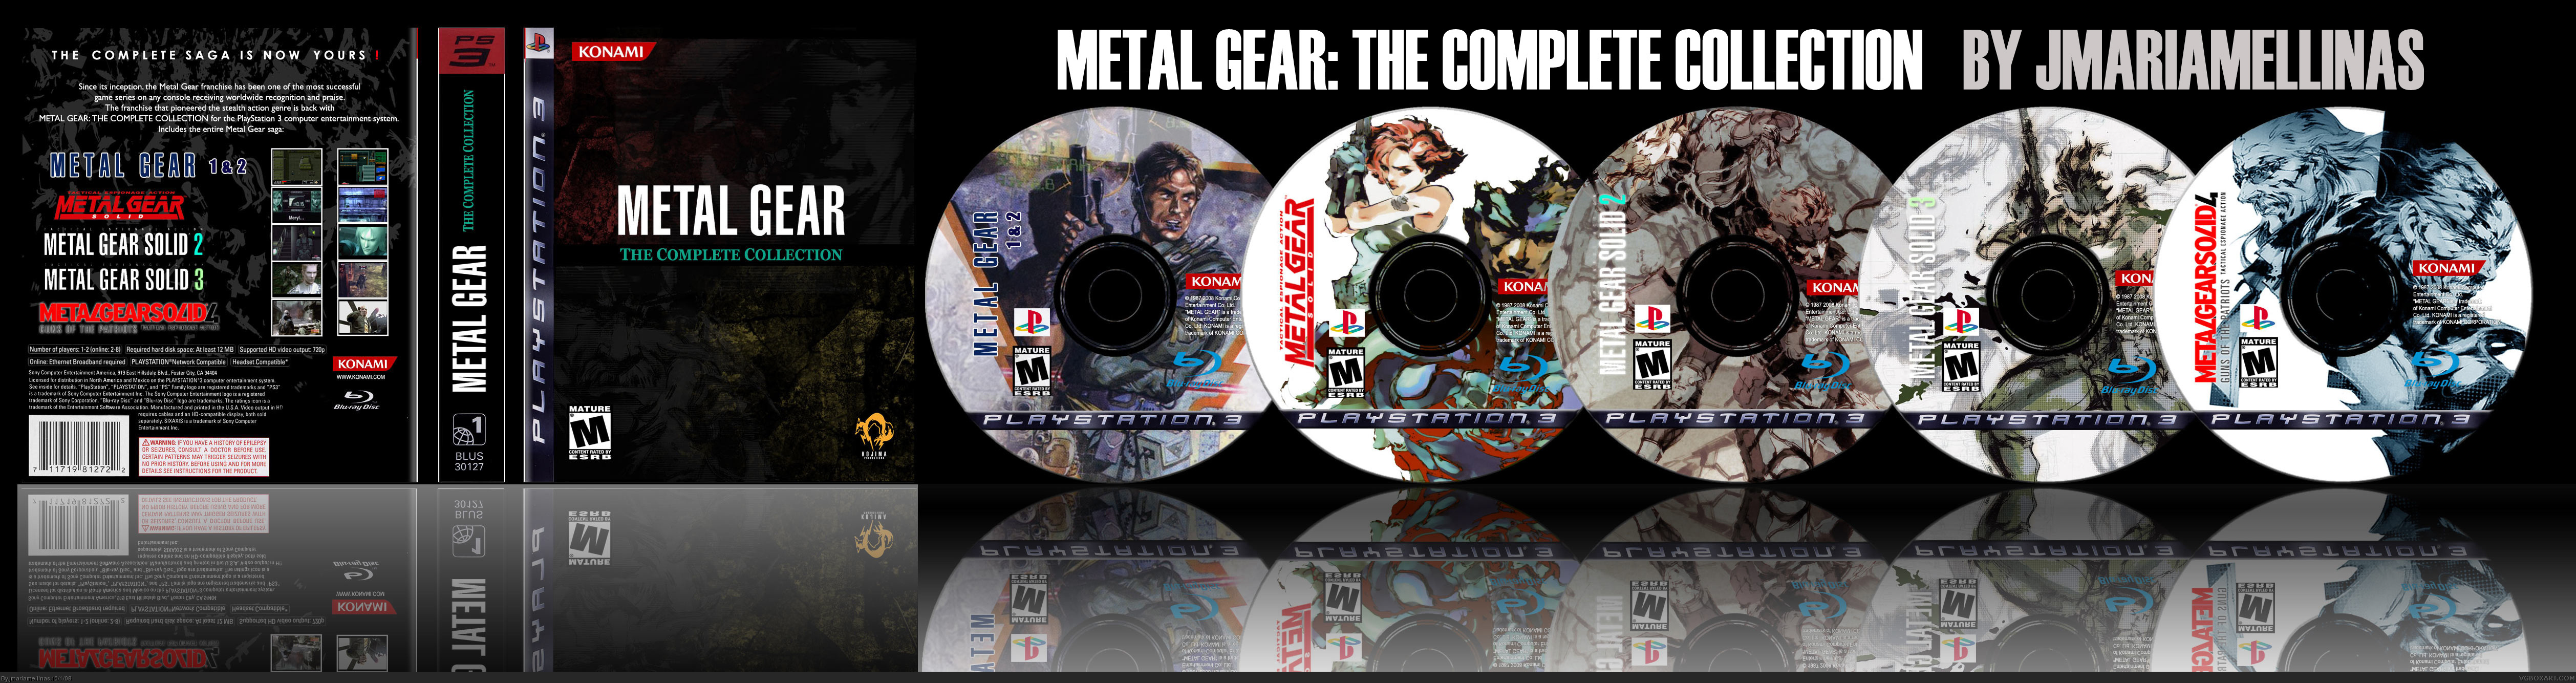 Metal Gear: The Complete Collection box cover